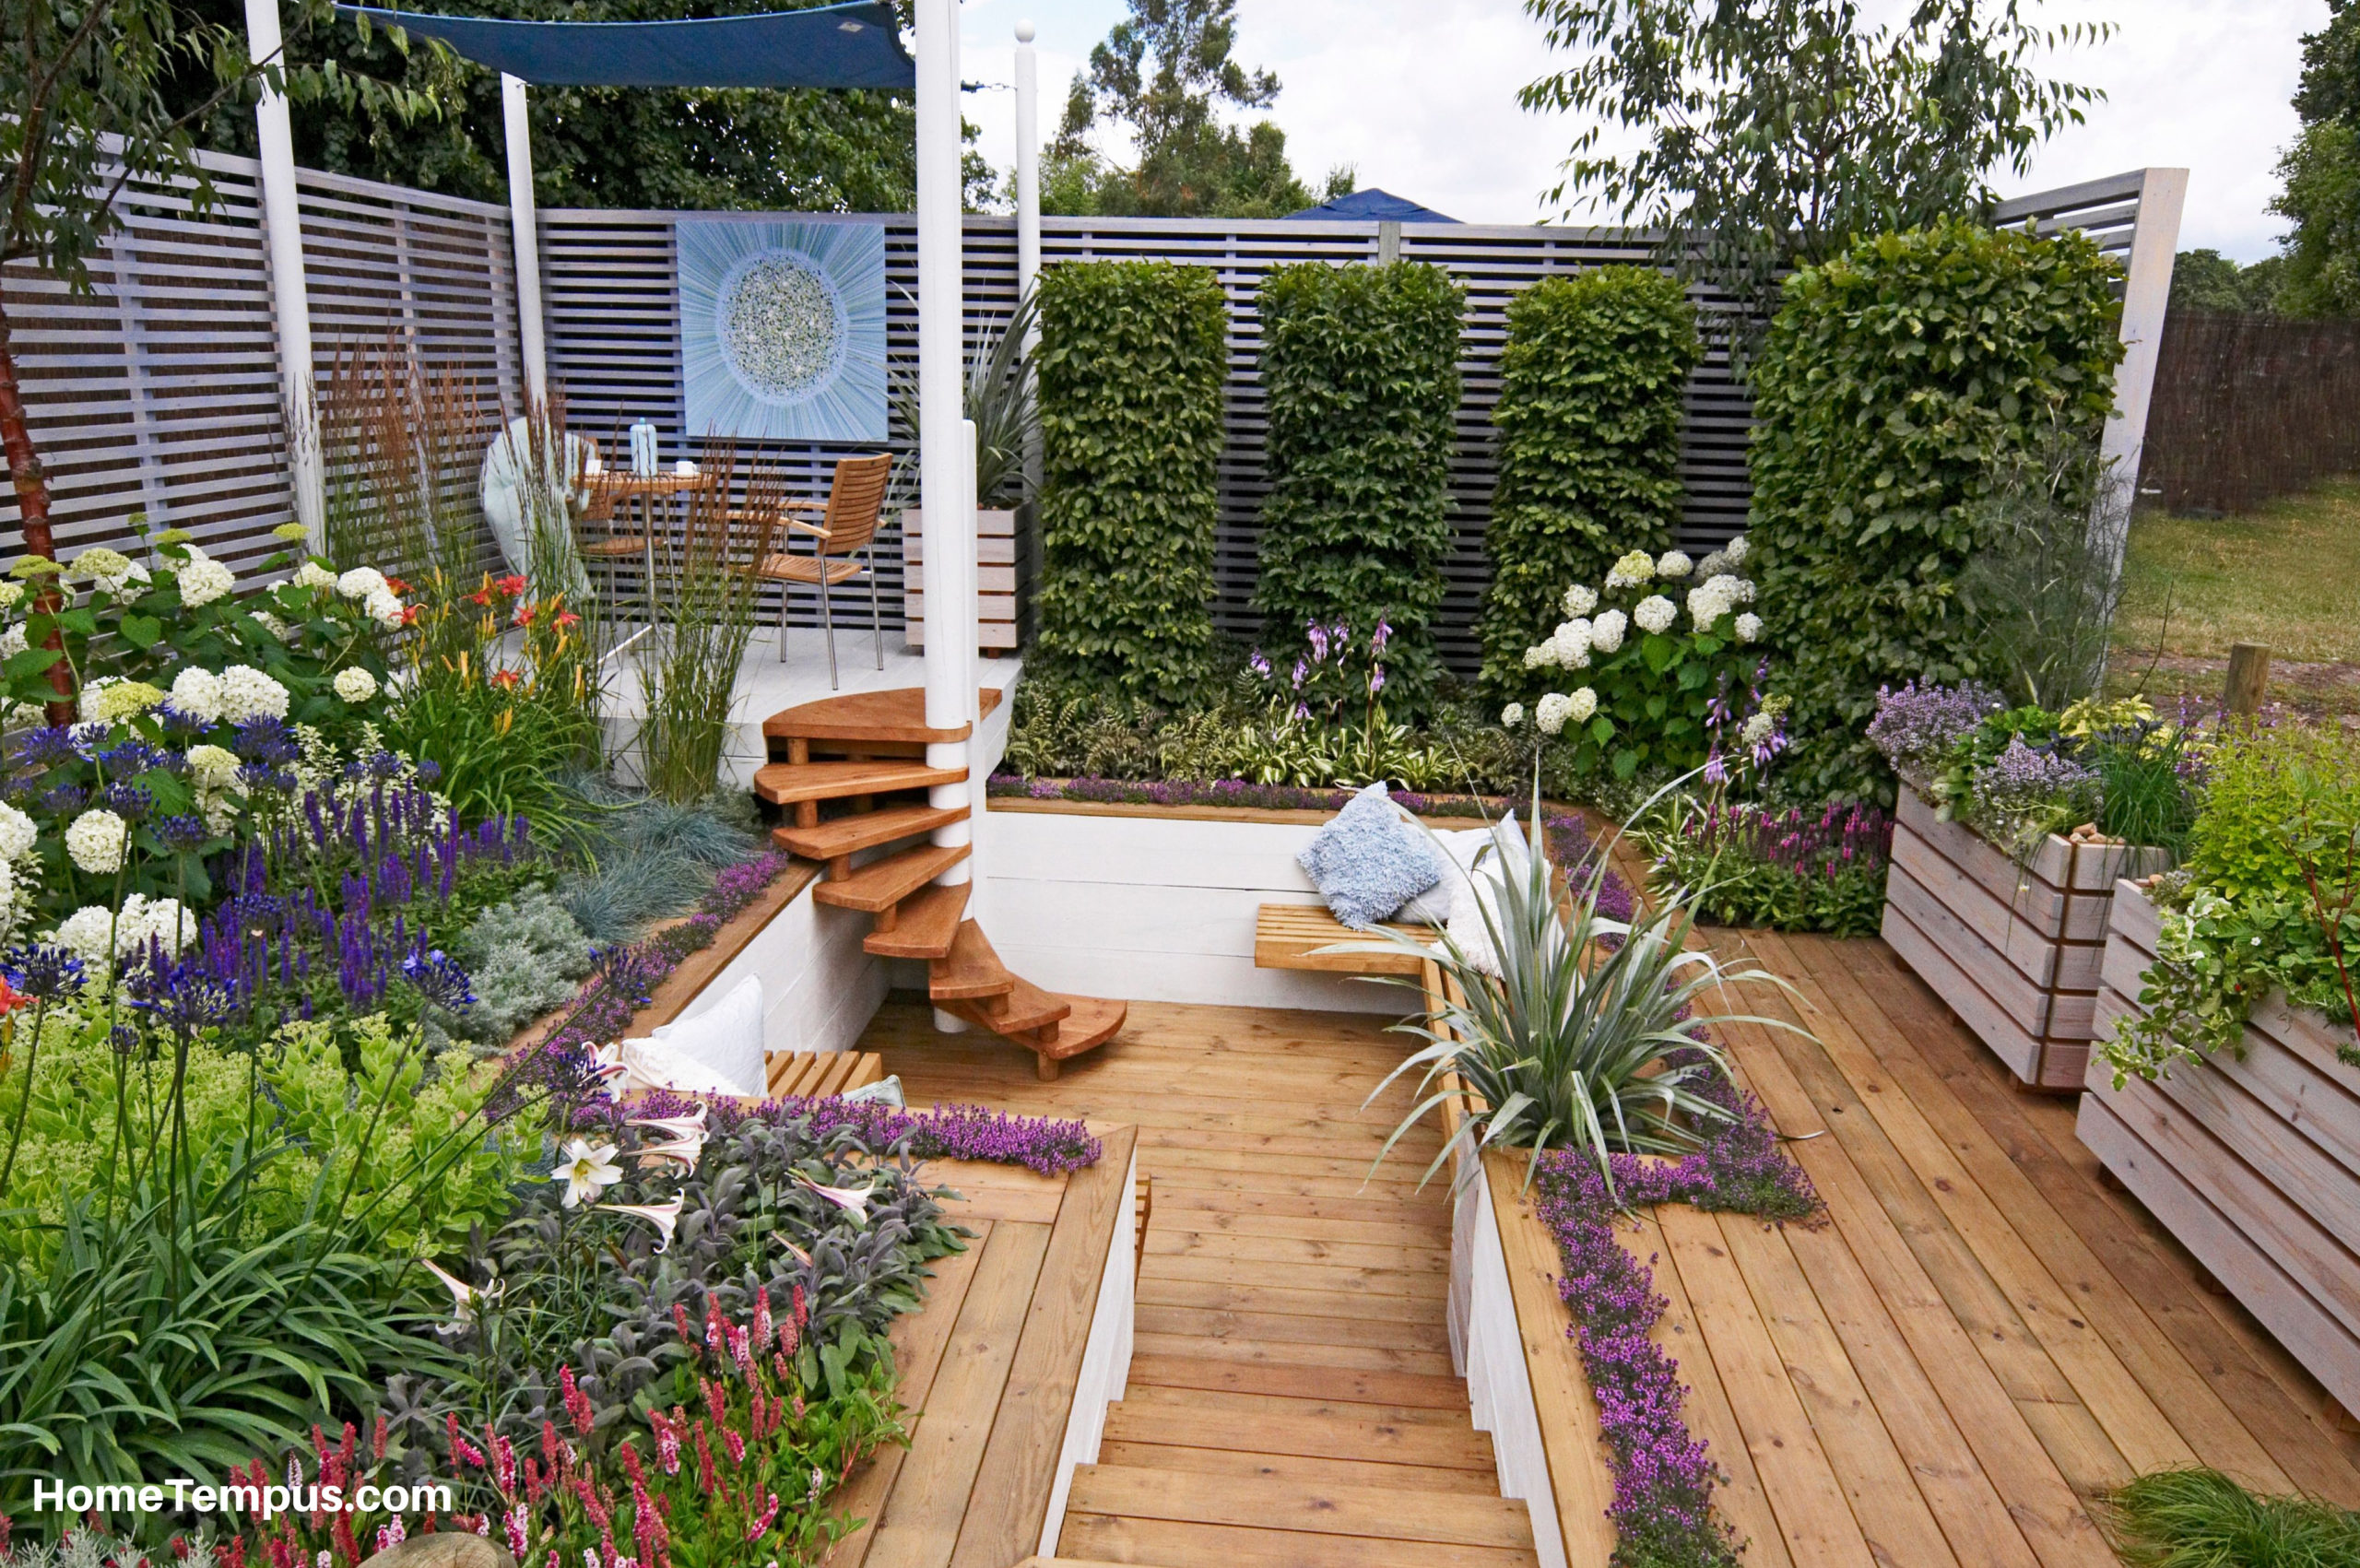 Urban style garden with seating and decking.